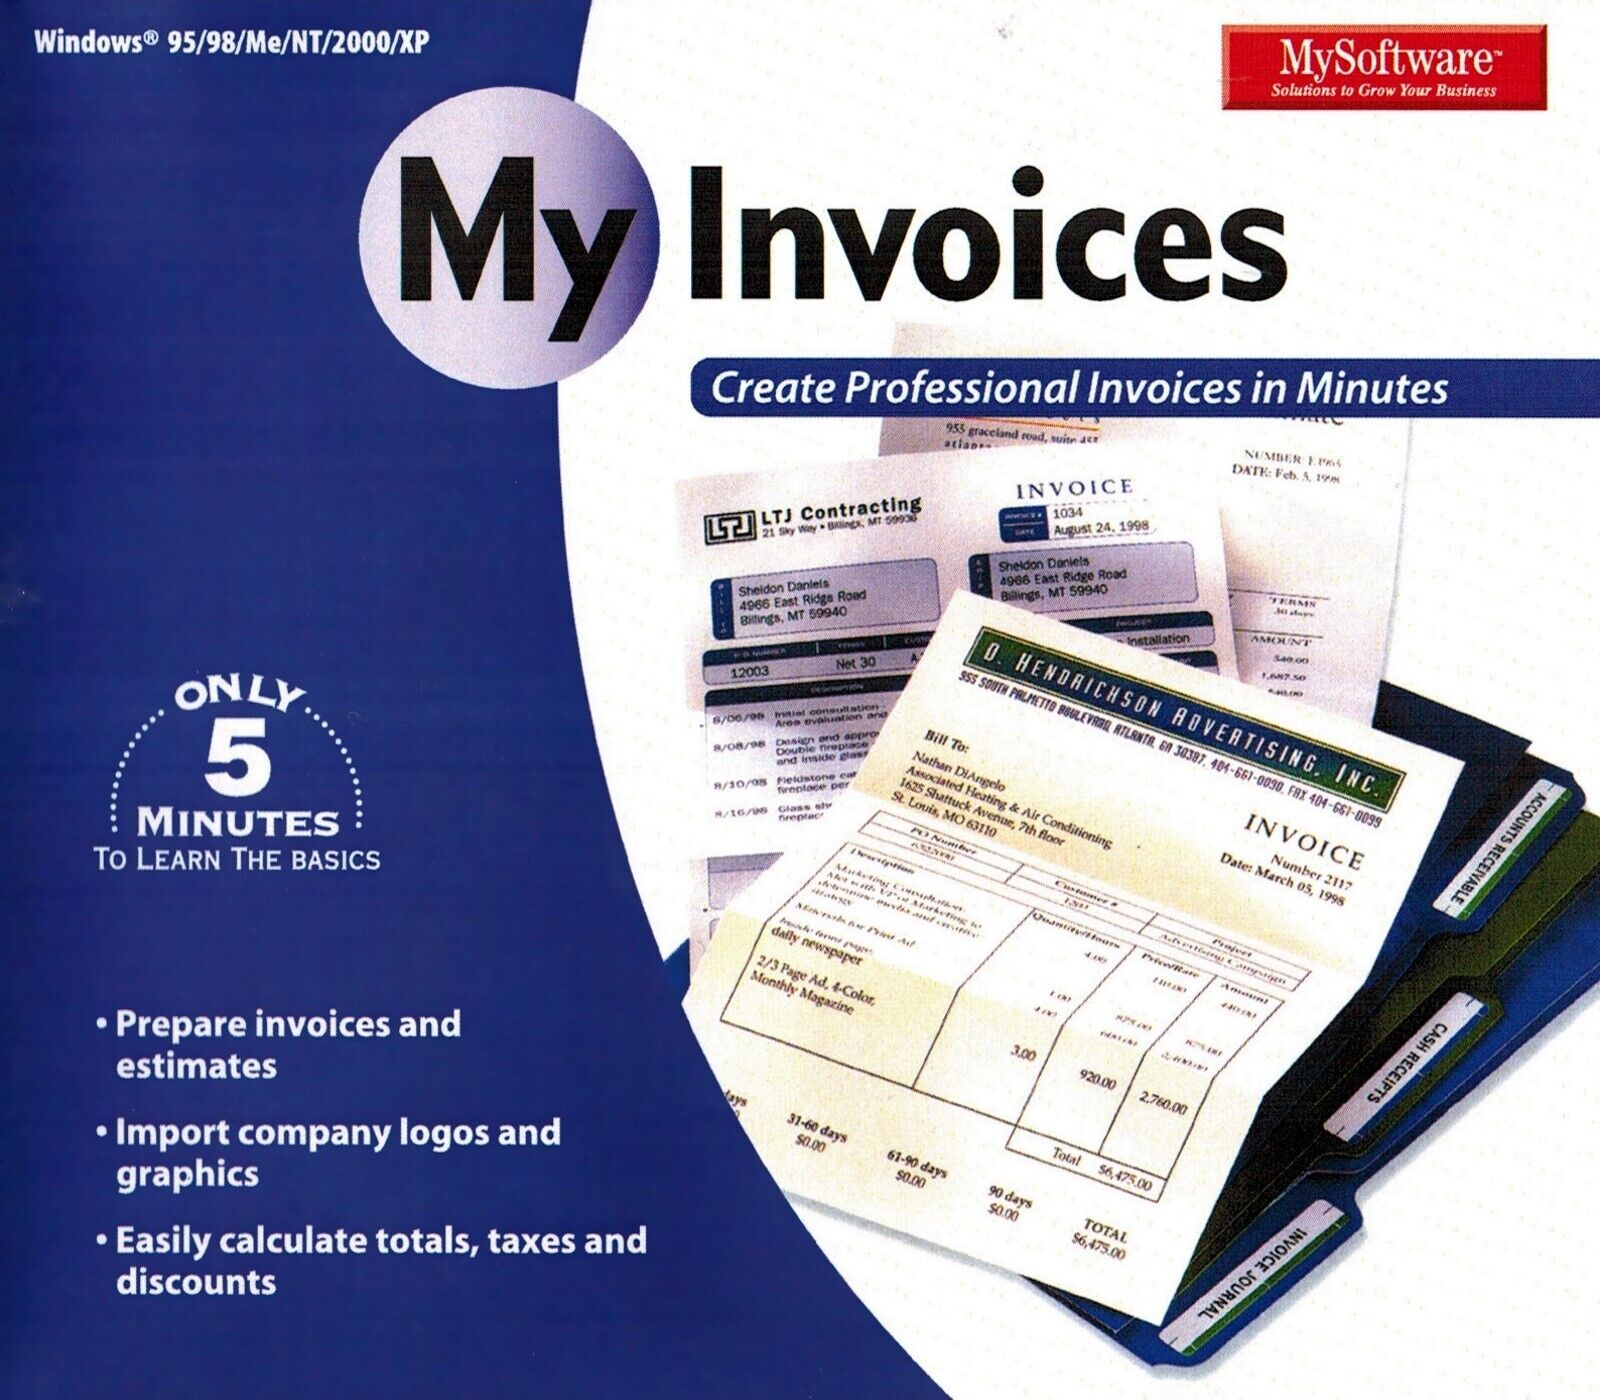 My Software Invoices MySoftware - Prepare in 3 Easy Steps PC Software Sealed New